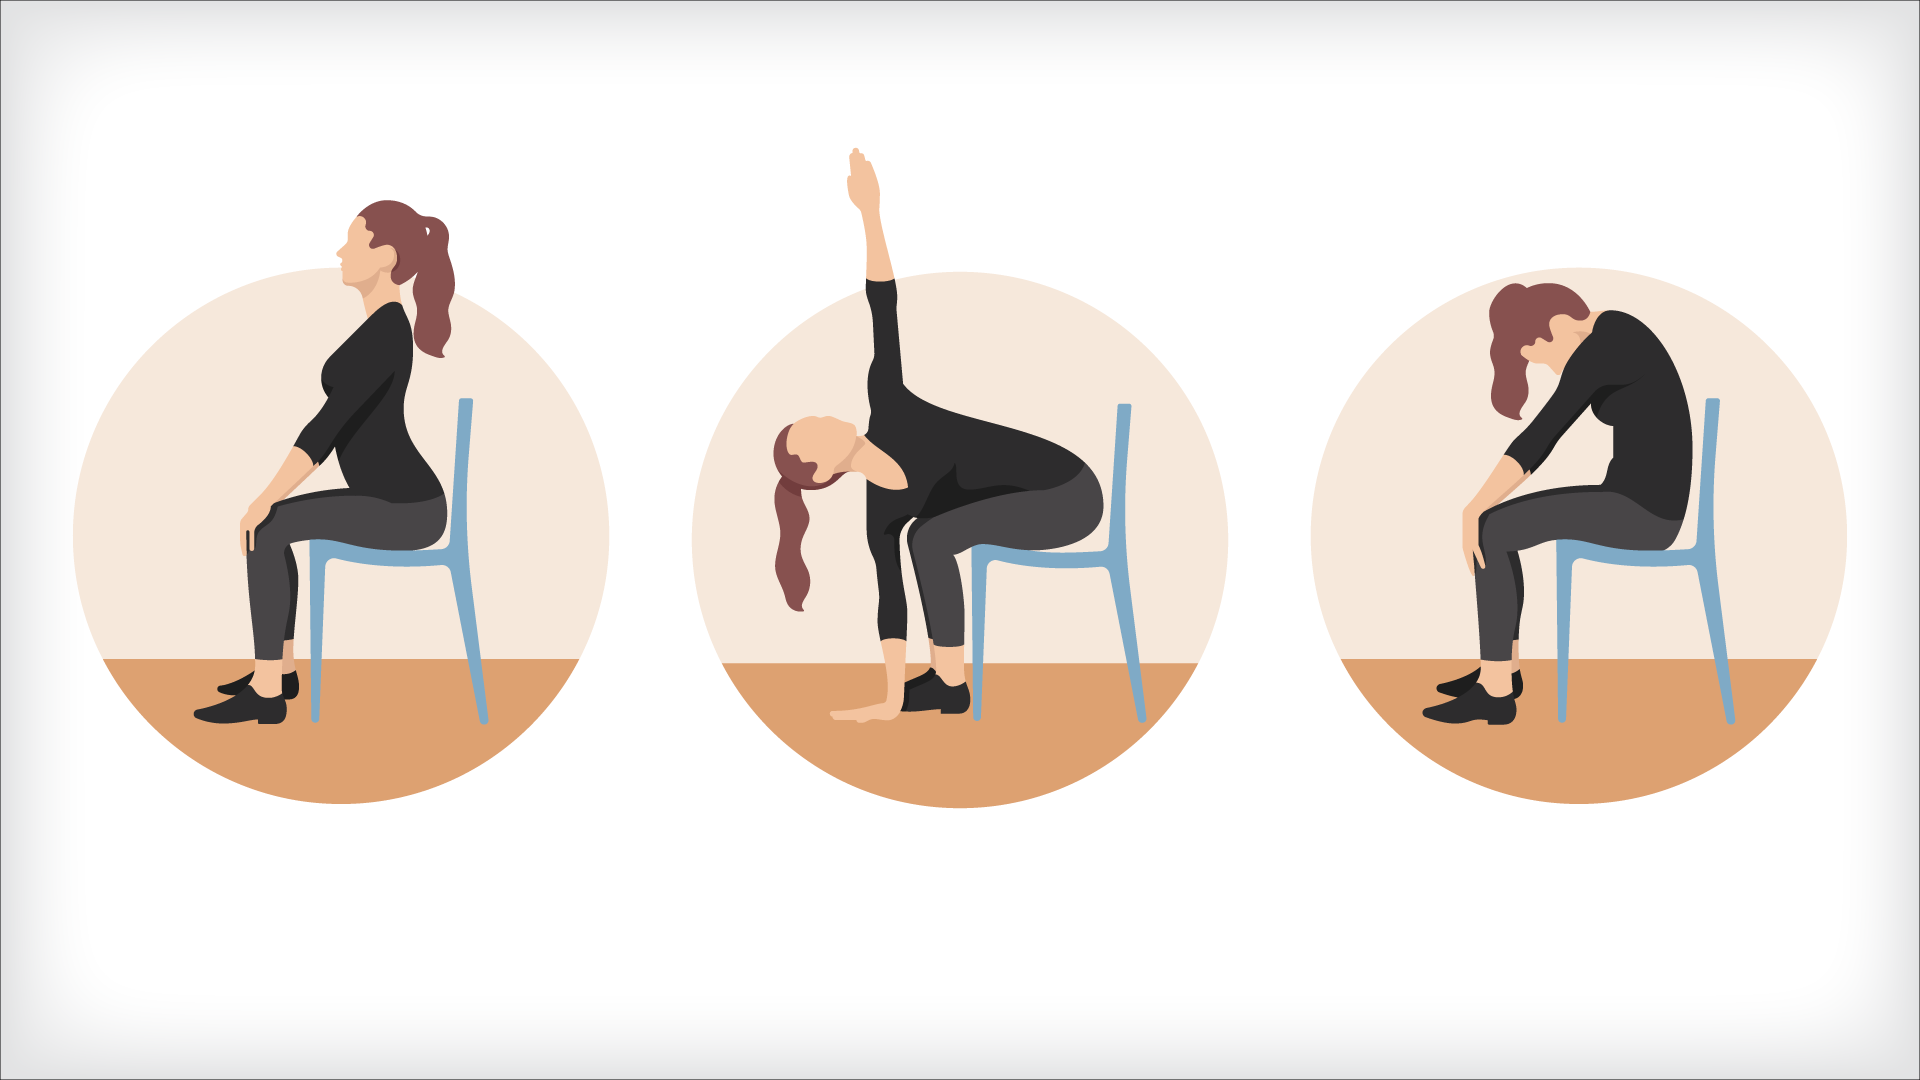 Chair Yoga Flow: A Dynamic Way to Sit and Practice